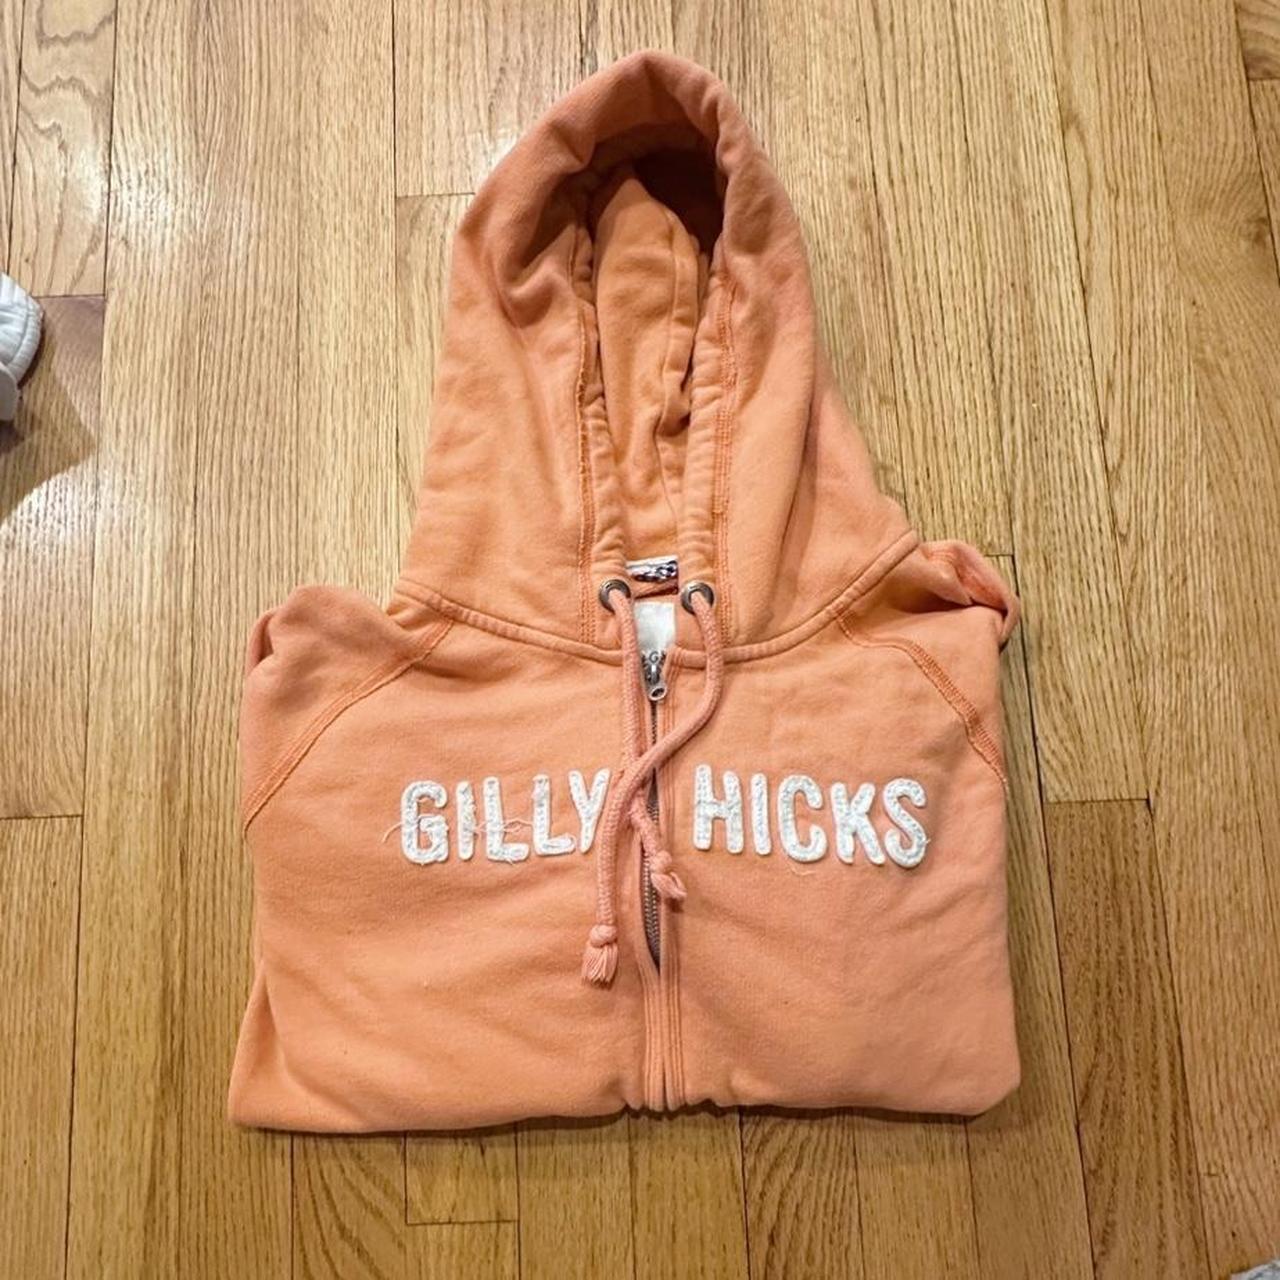 Gilly Hicks, Preowned & Secondhand Fashion